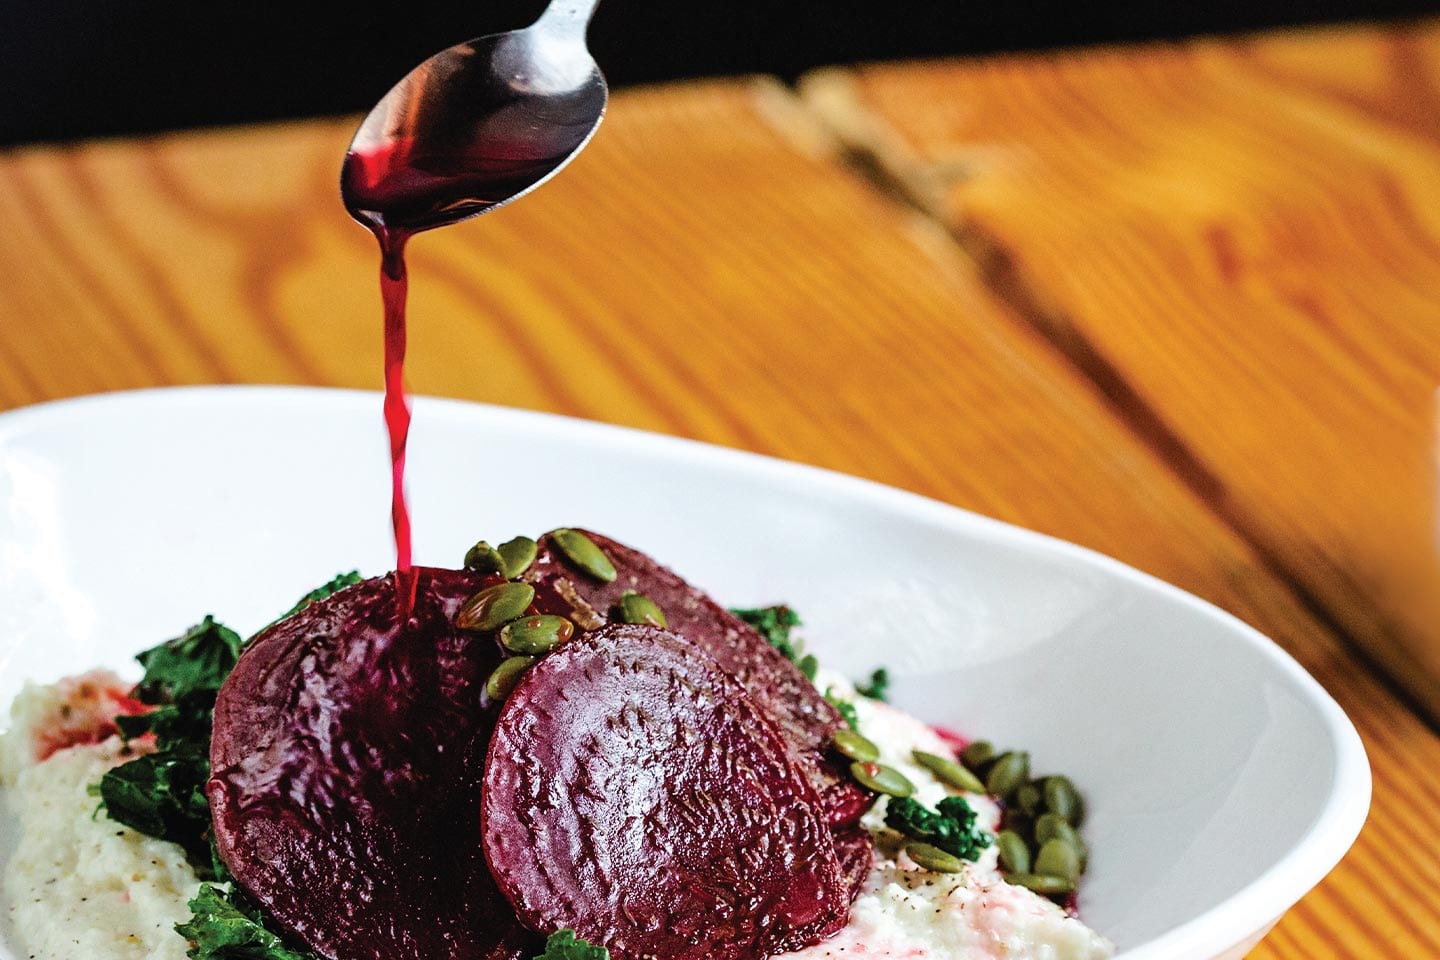 beet reduction sauce being drizzled onto the daily ration's "drop the beet" bowl